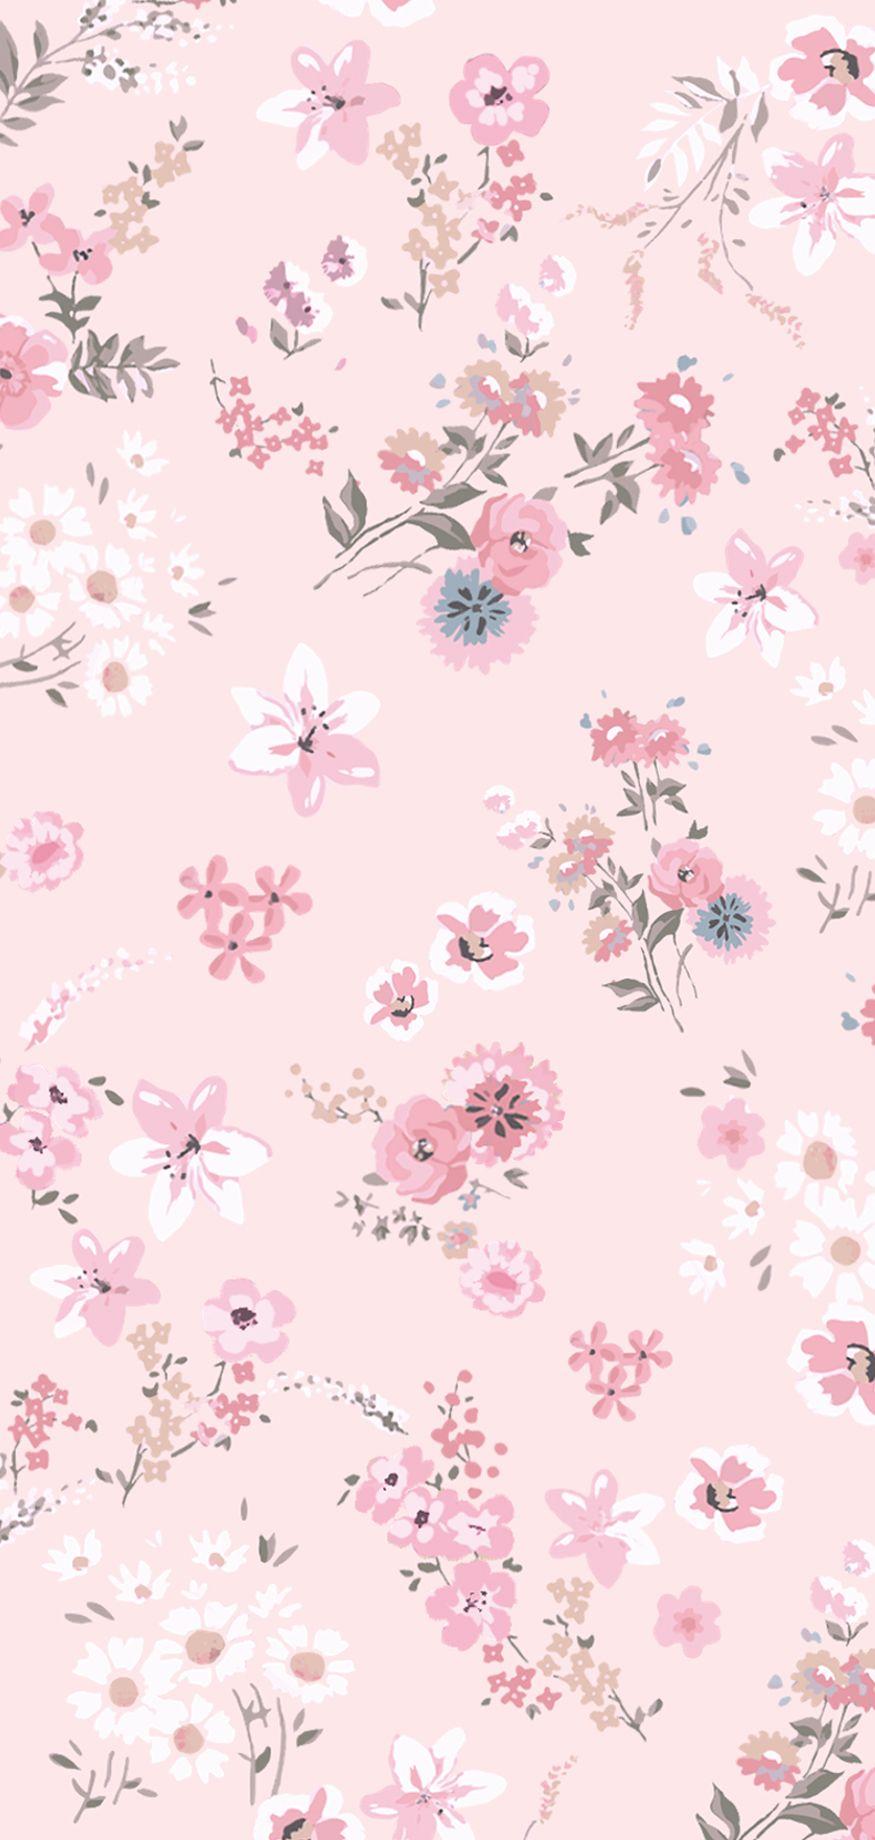 Tiny Flowers. Floral wallpaper iphone, Pastel iphone wallpaper, Flower phone wallpaper